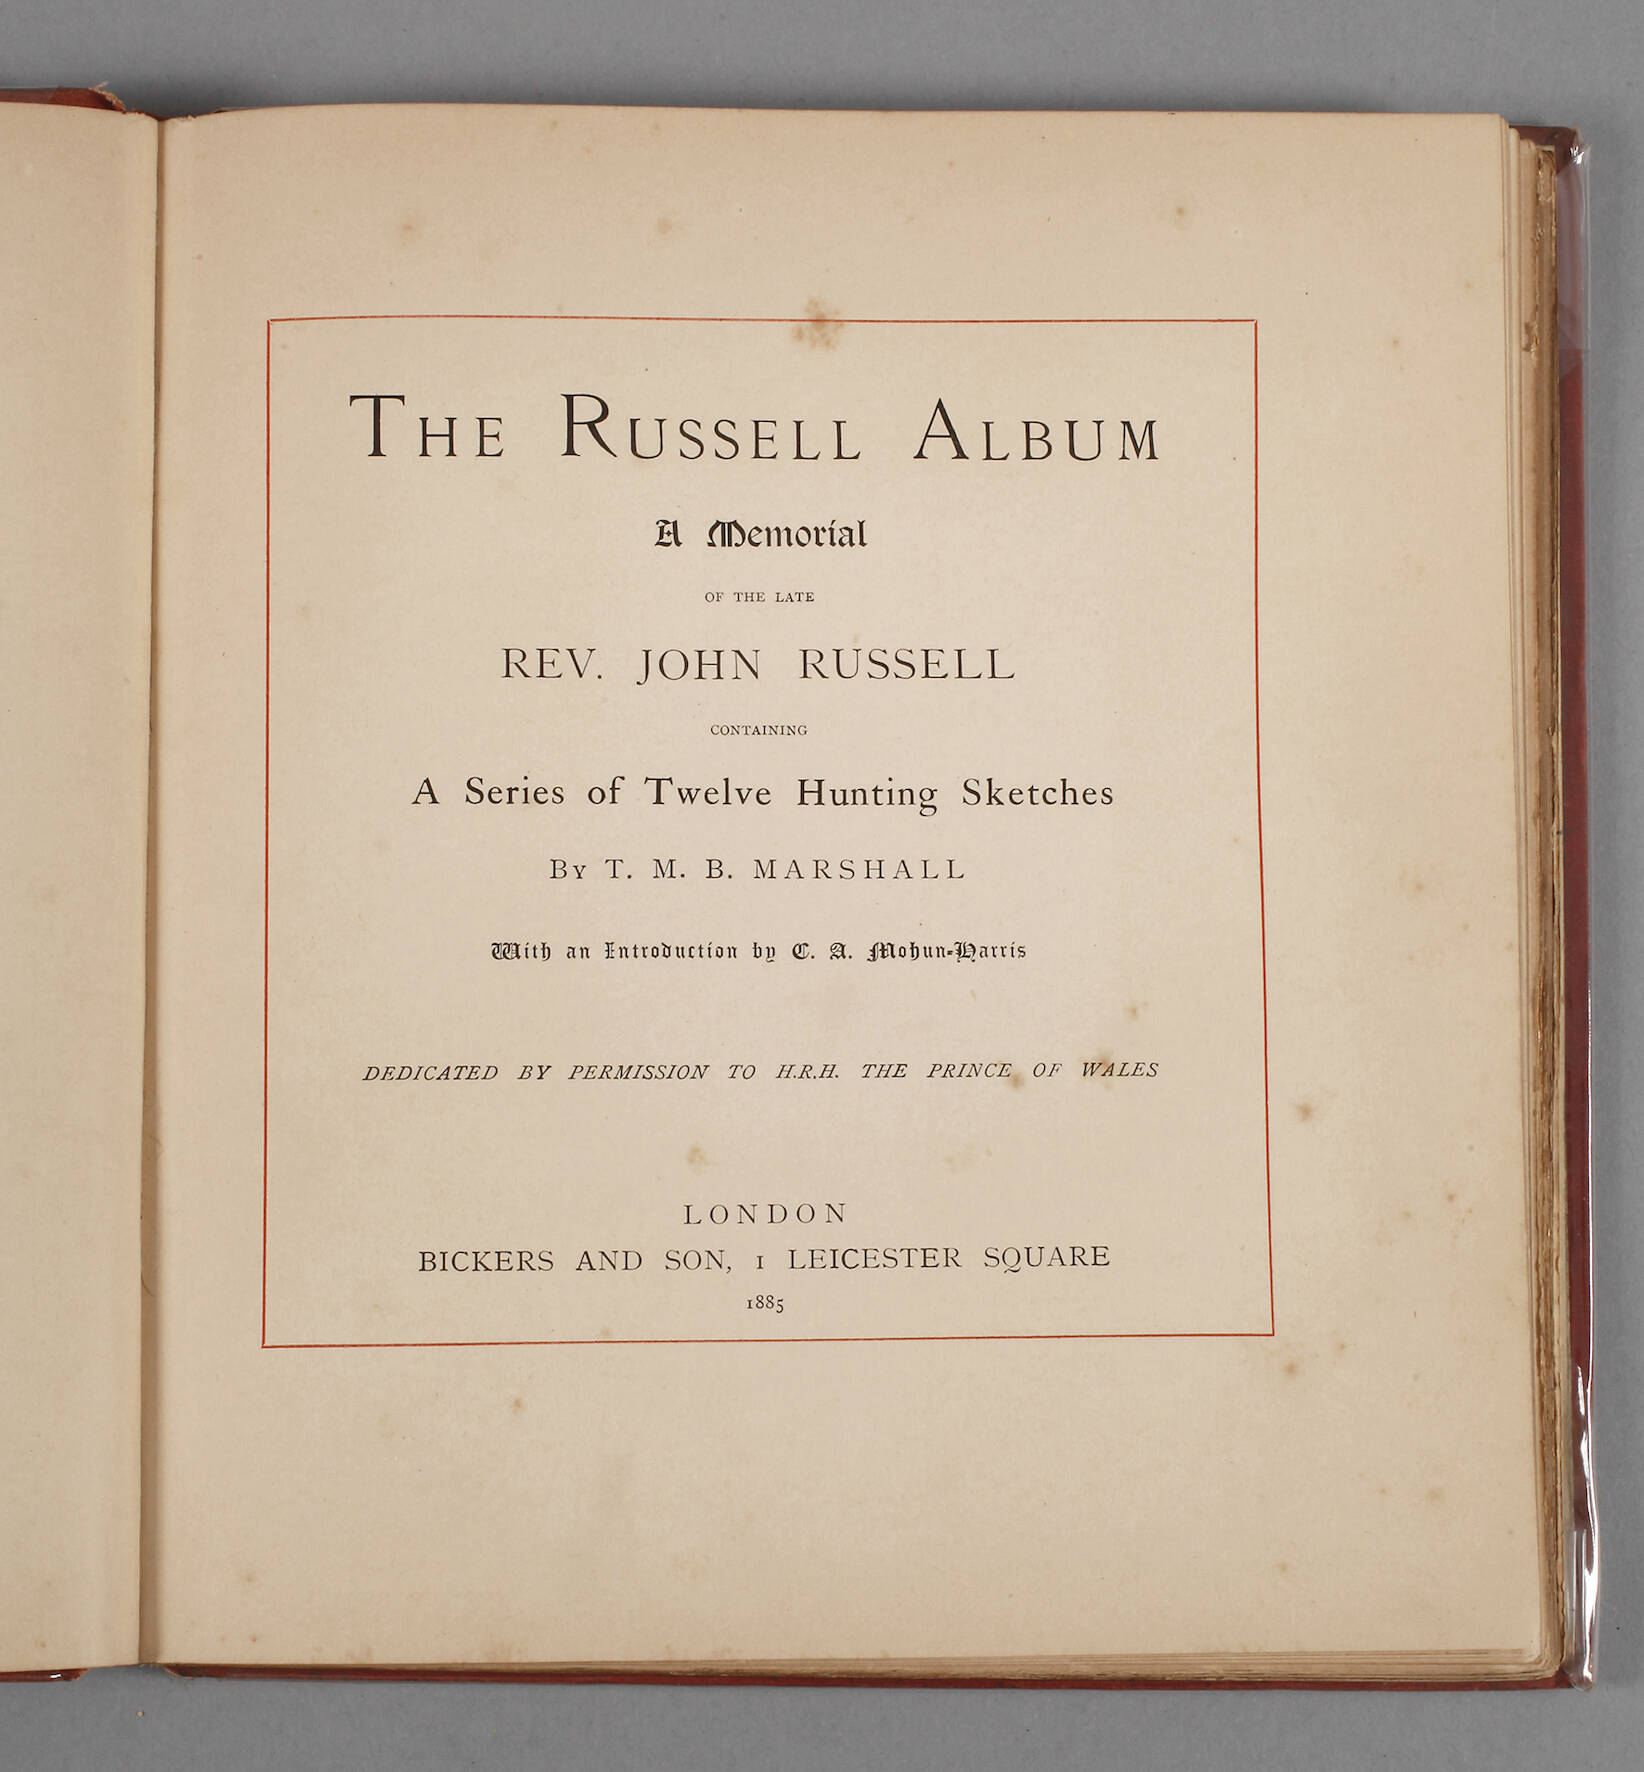 The Russell Album